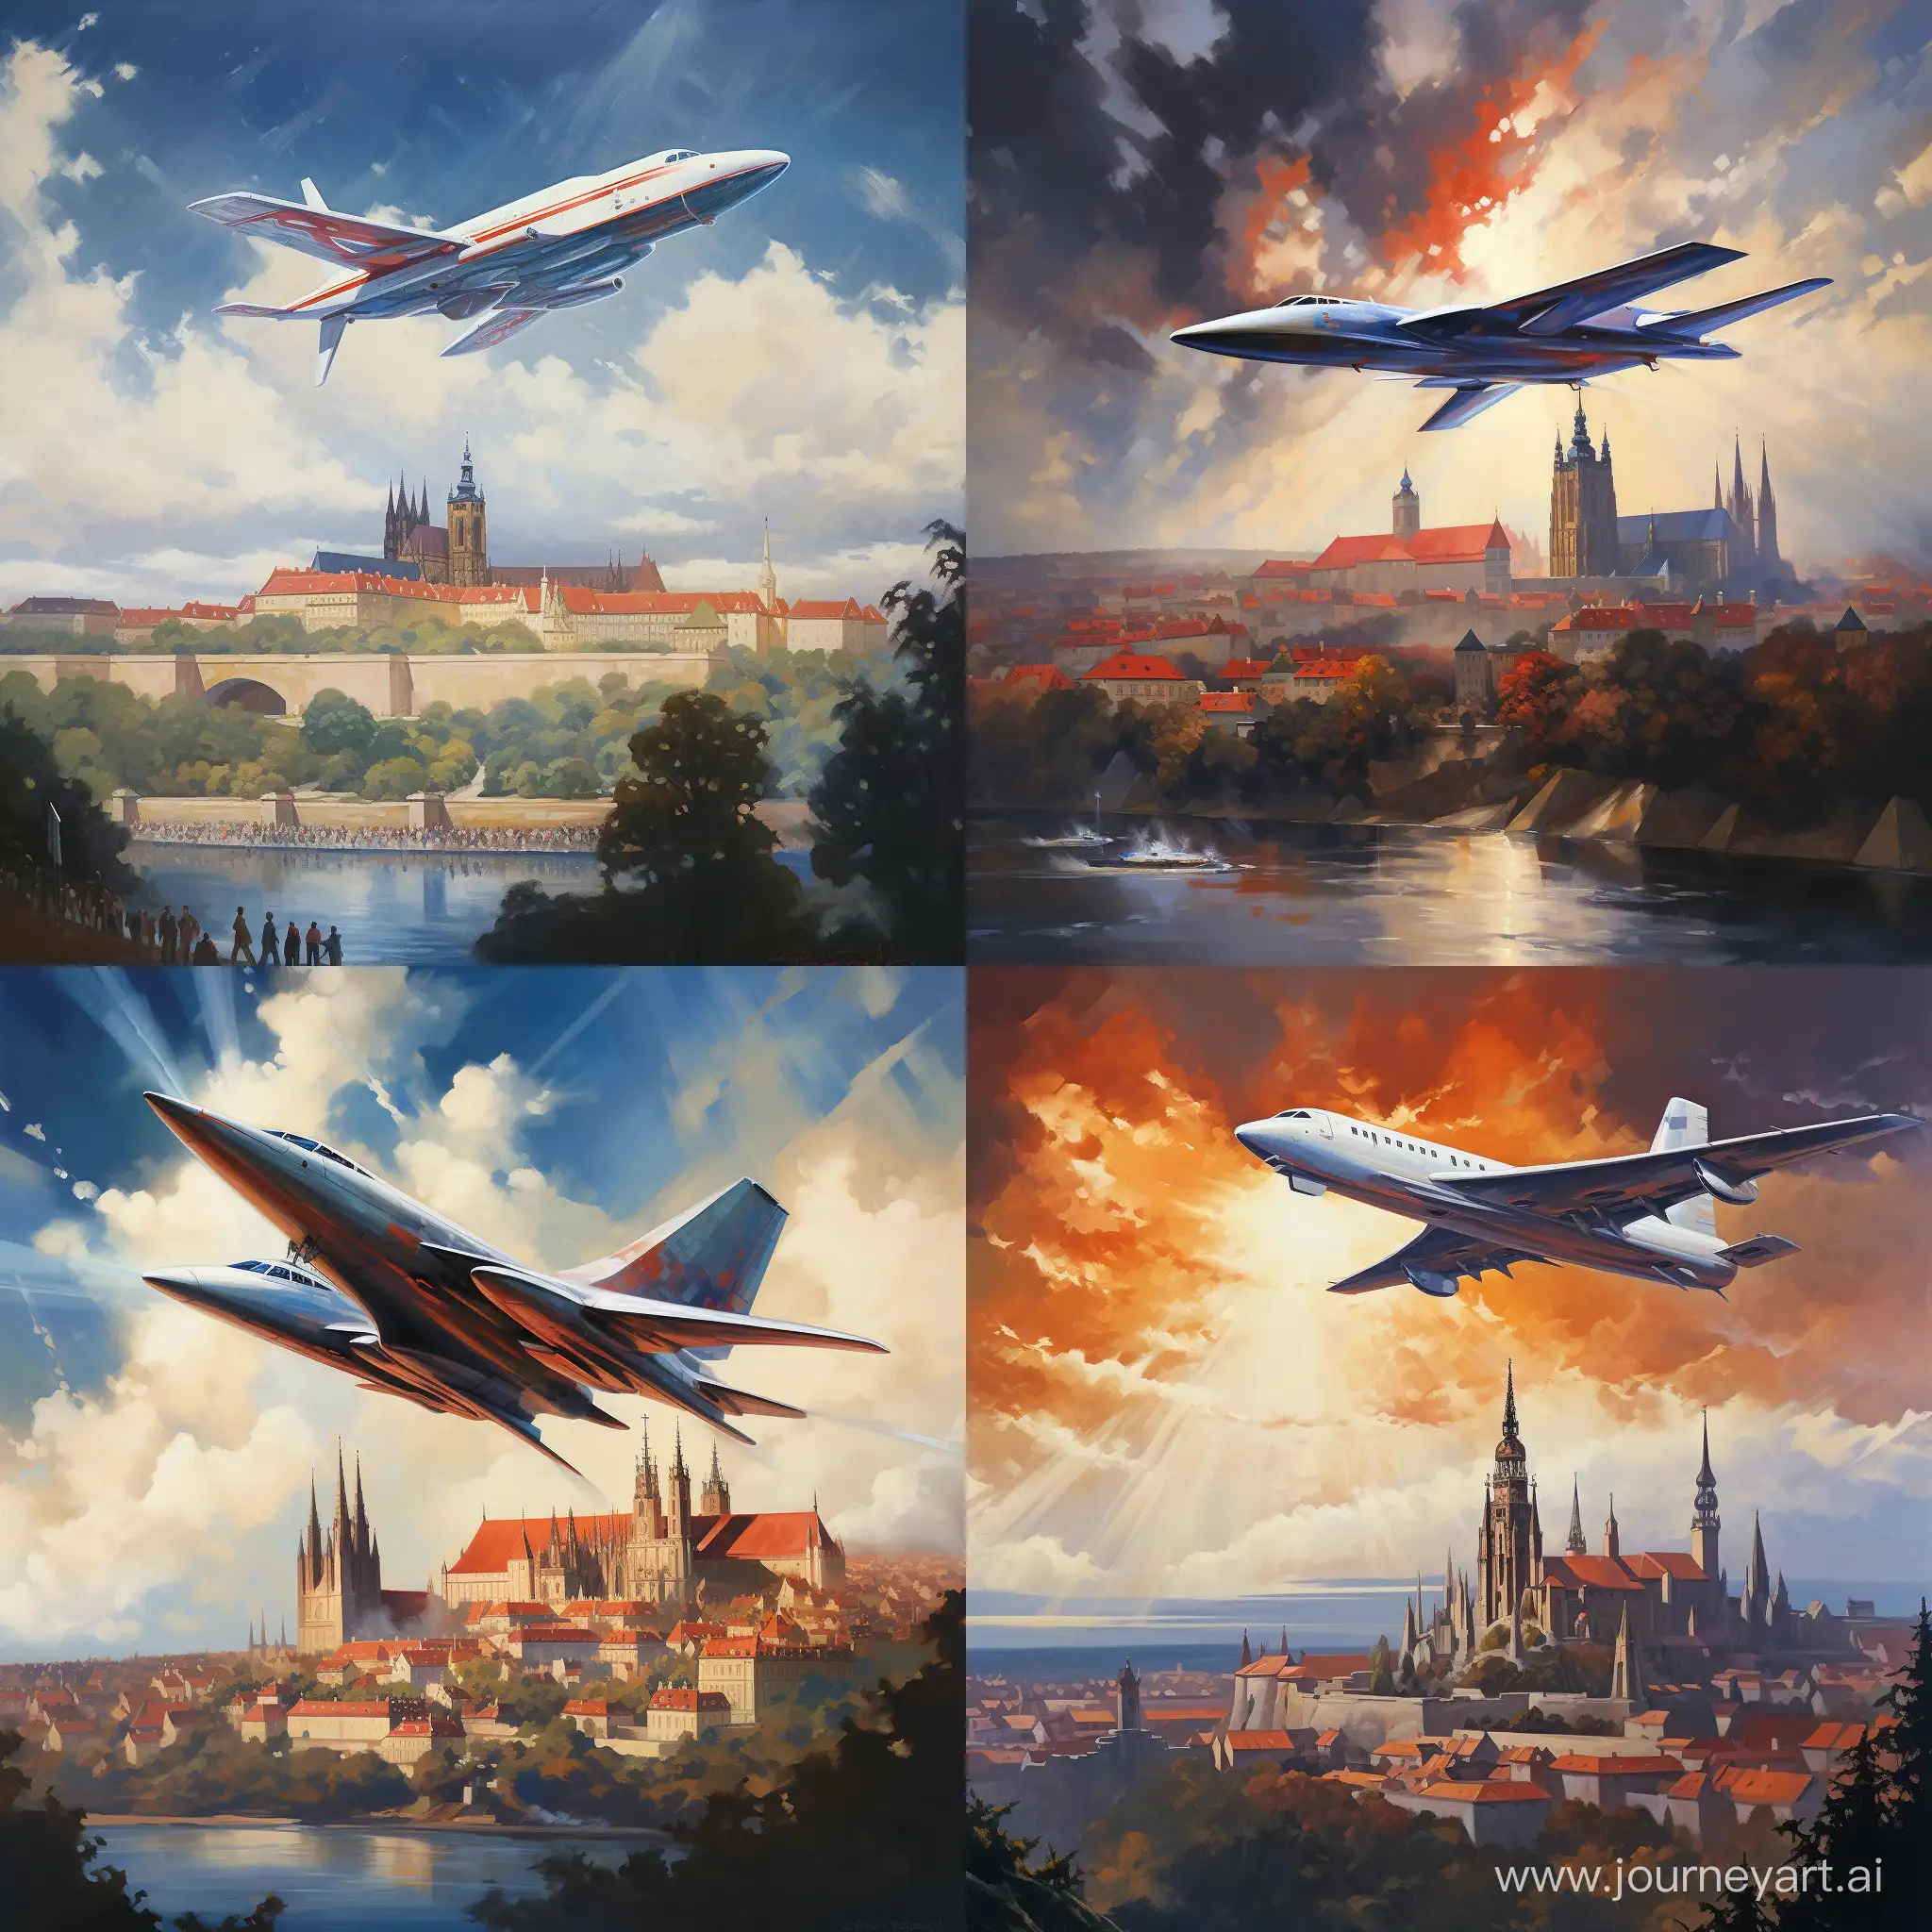 Concorde-Soaring-Above-Prague-Castle-in-Majestic-Oil-Painting